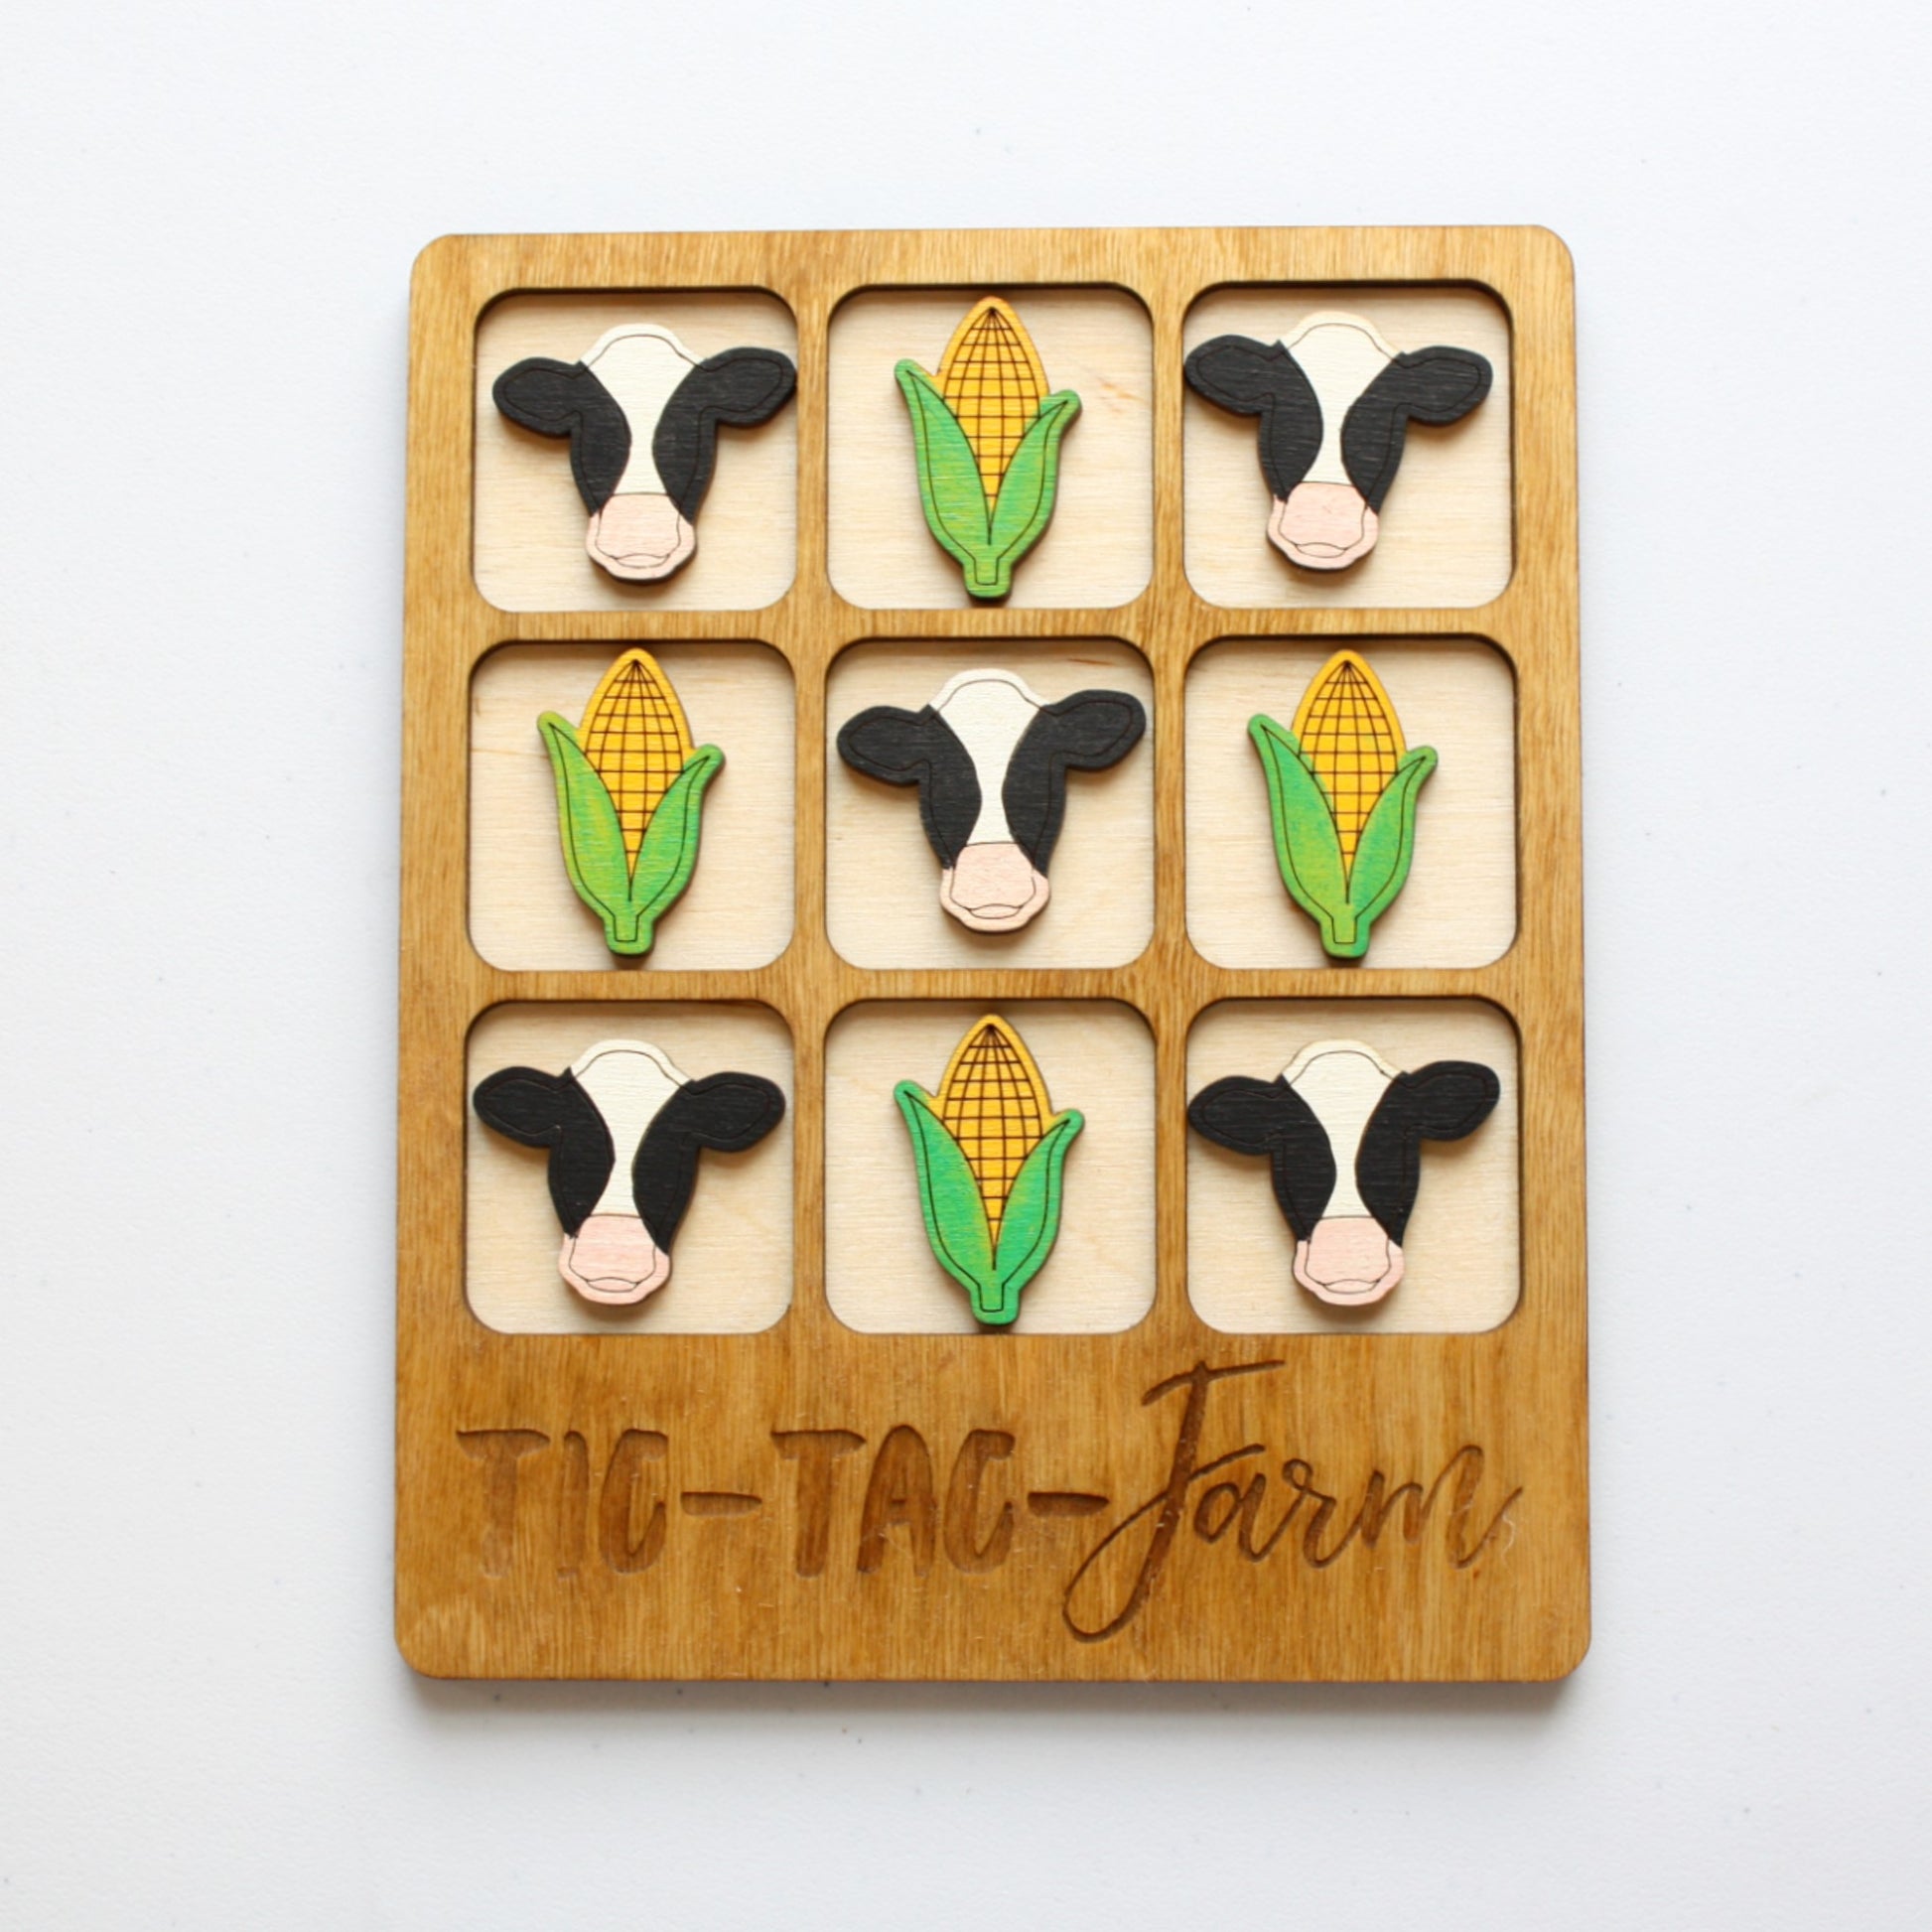 Tic Tac Toe Game - Farm - Made in the USA